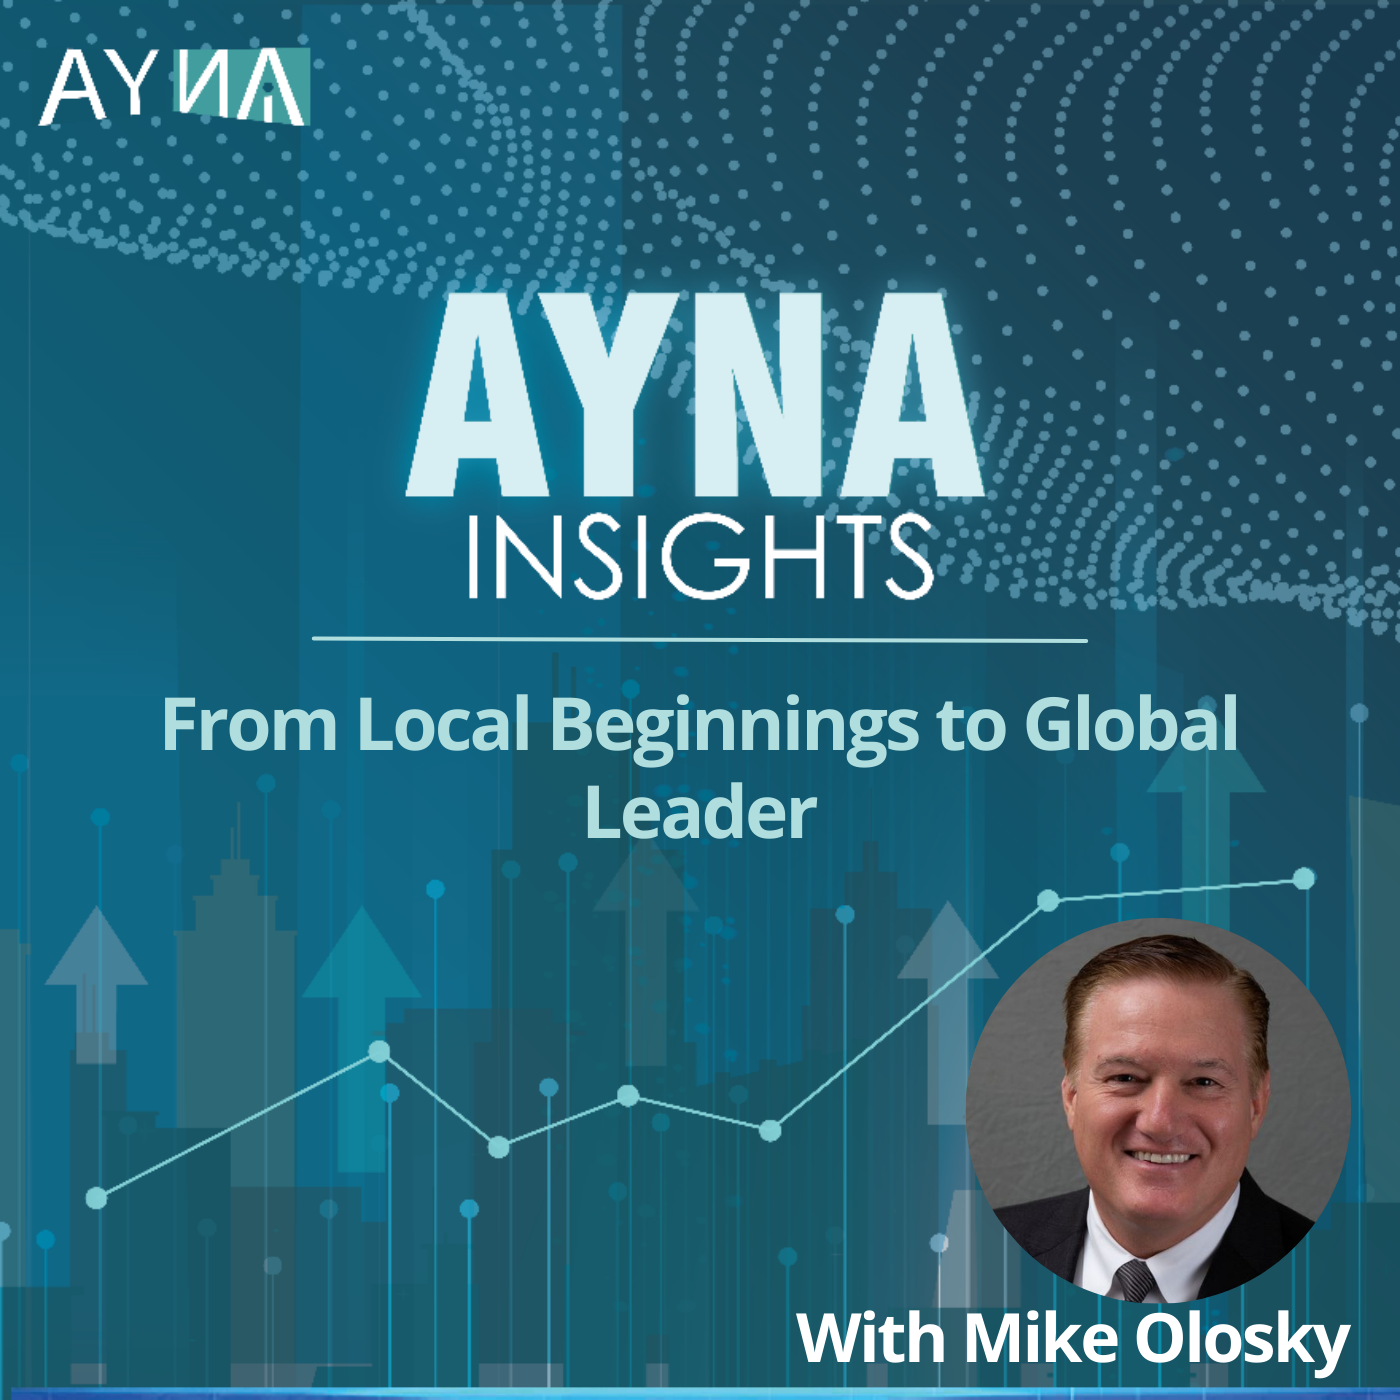 Mike Olosky: From Local Beginnings to Global Leader